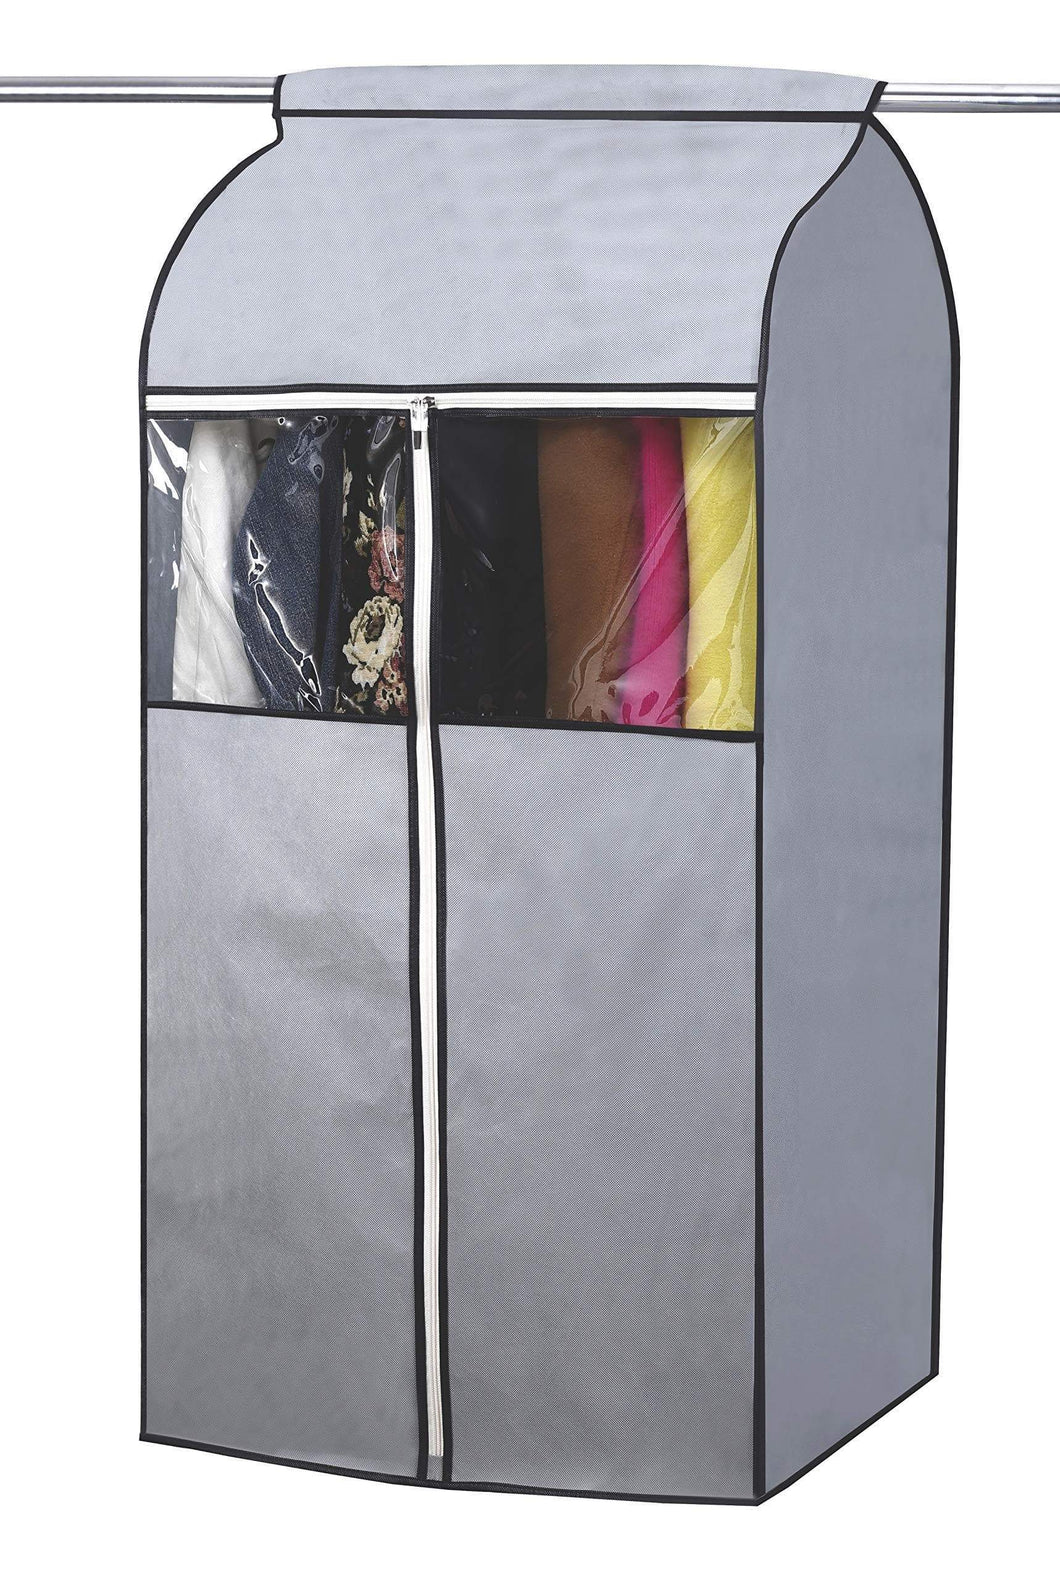 Budget friendly sleeping lamb garment bag organizer storage with clear pvc windows garment rack cover well sealed hanging closet cover for suits coats jackets grey